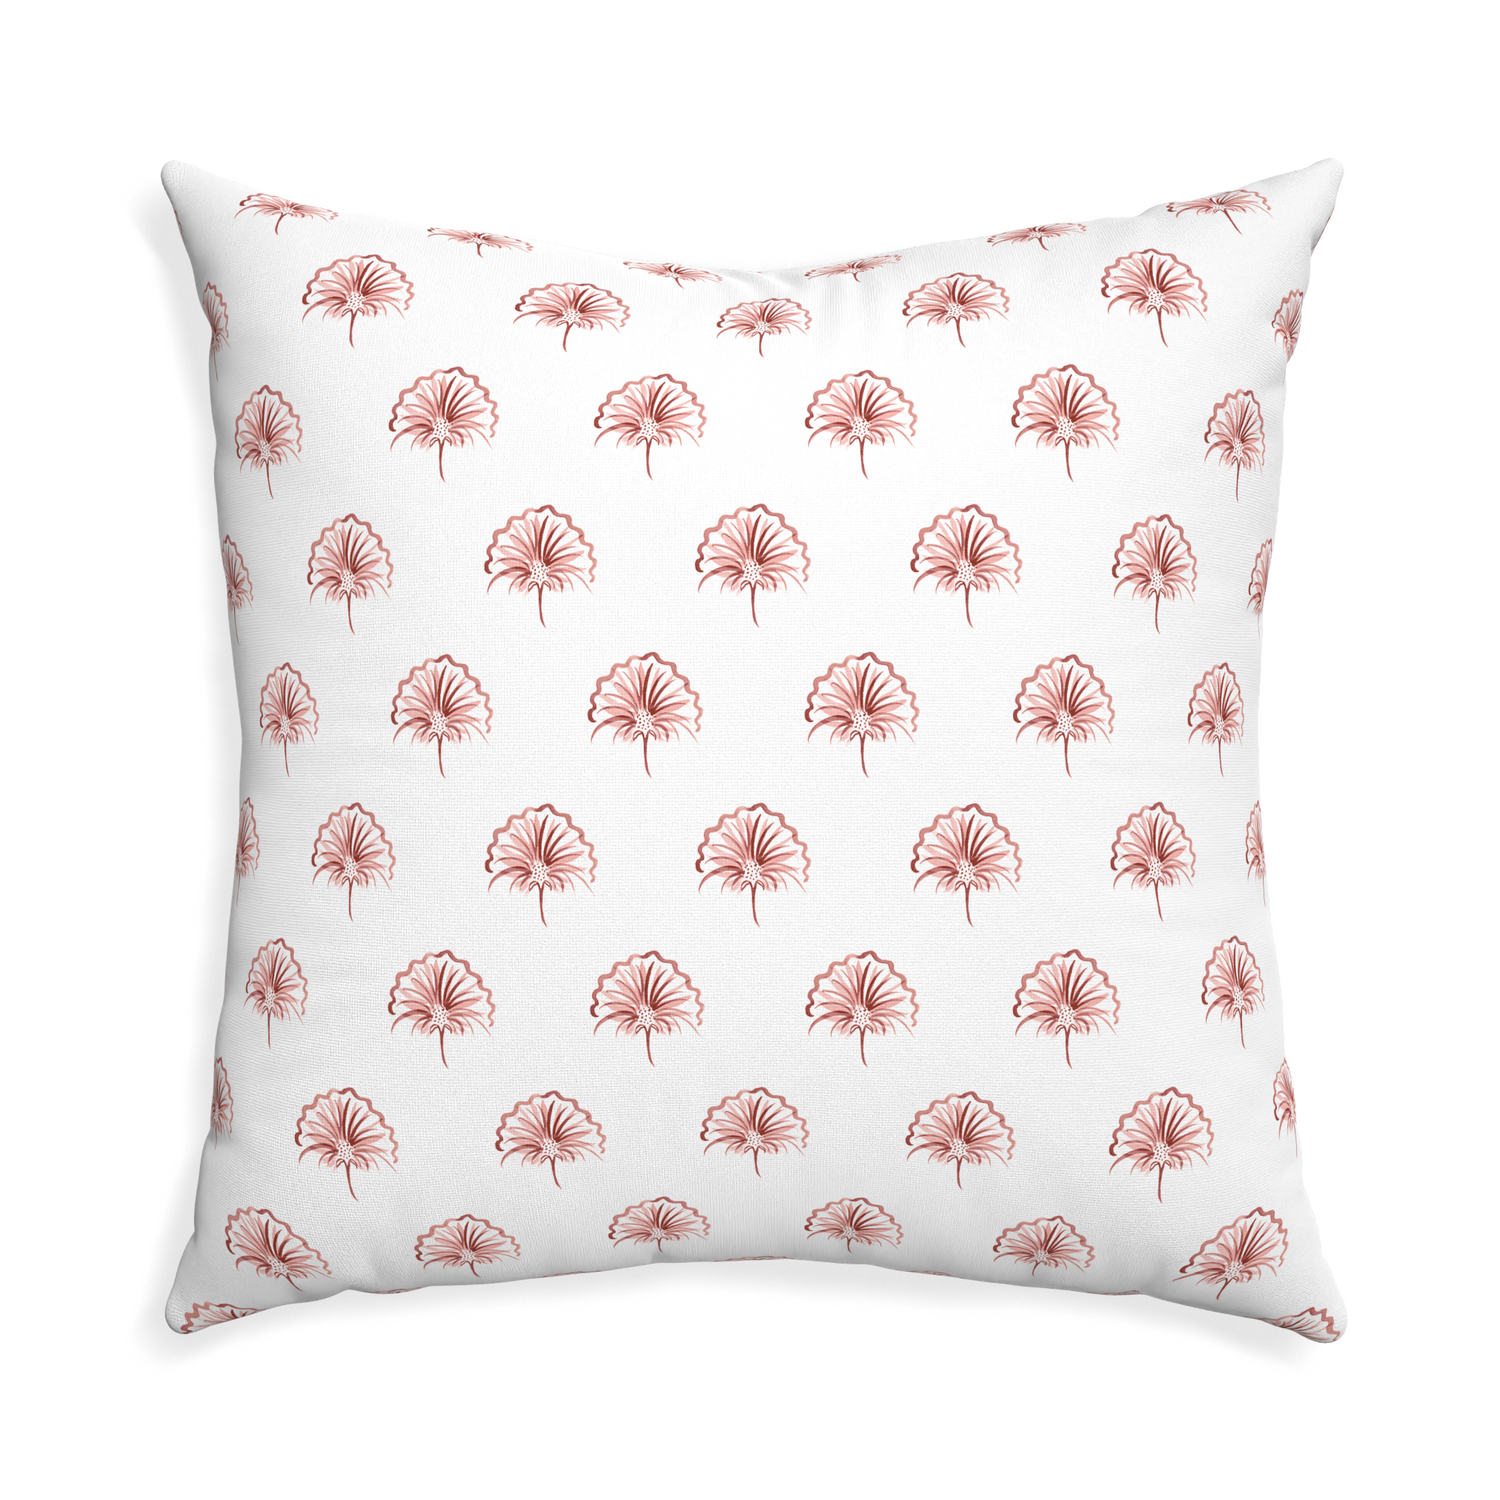 Euro-sham penelope rose custom floral pinkpillow with none on white background